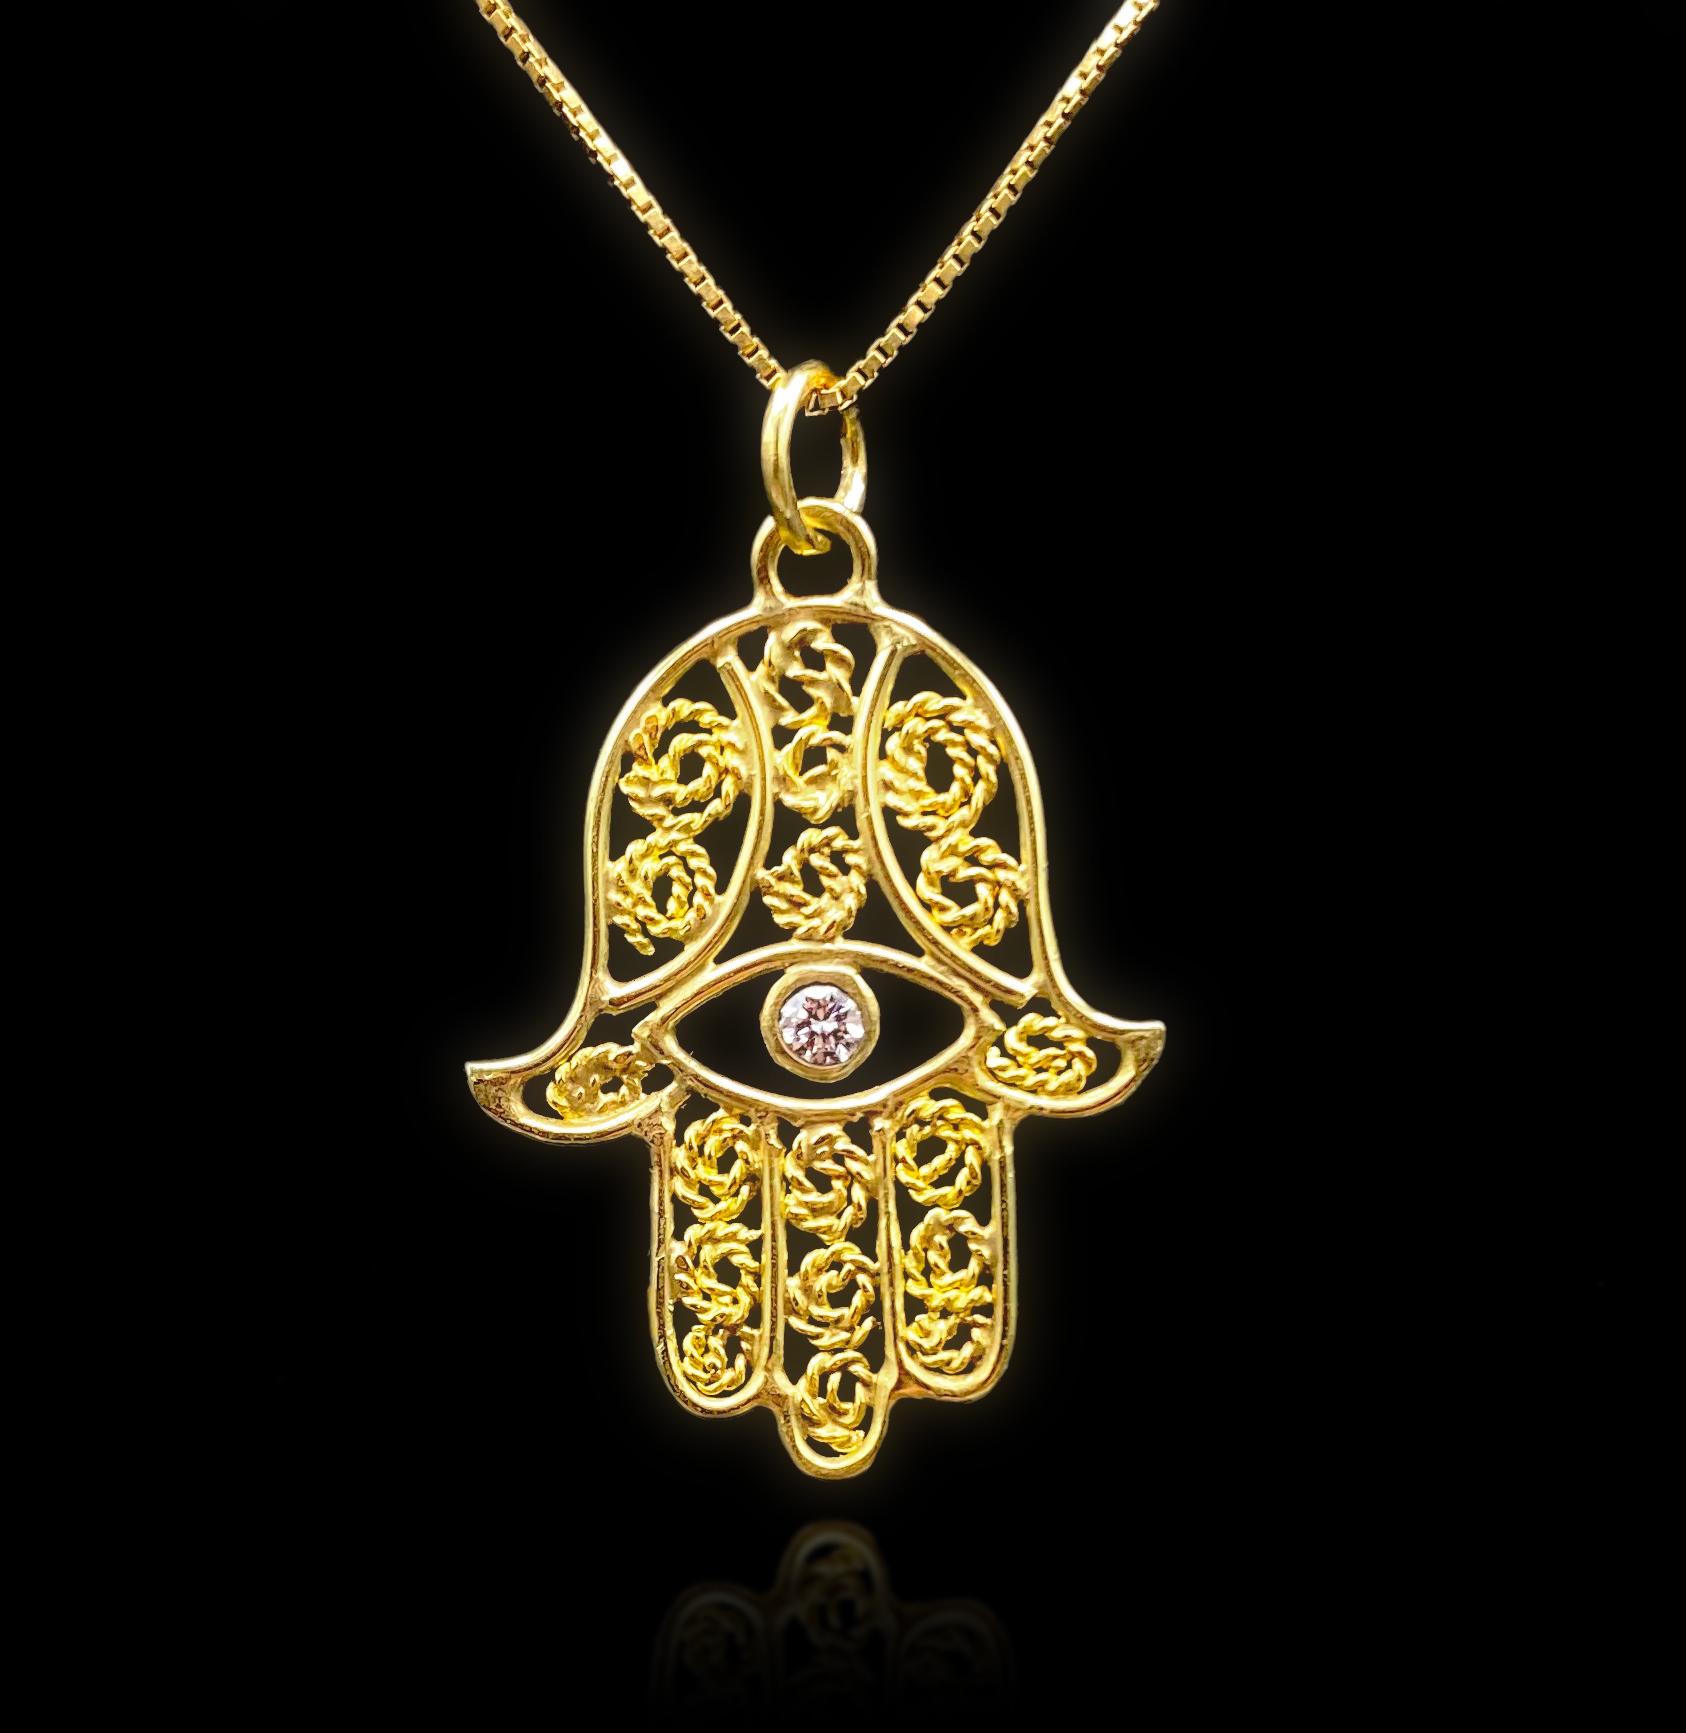 - Available
-Handmade
-18k gold frame.
-22k gold filigree wire.
-D-G VS1 0.107 carat diamond.
-This item is sold as a pendant only.

One of a kind Hand of Fatima.
It is also known as Khamsa ( which is number 5 in Arabic)  or Hamas.

The  Hand of